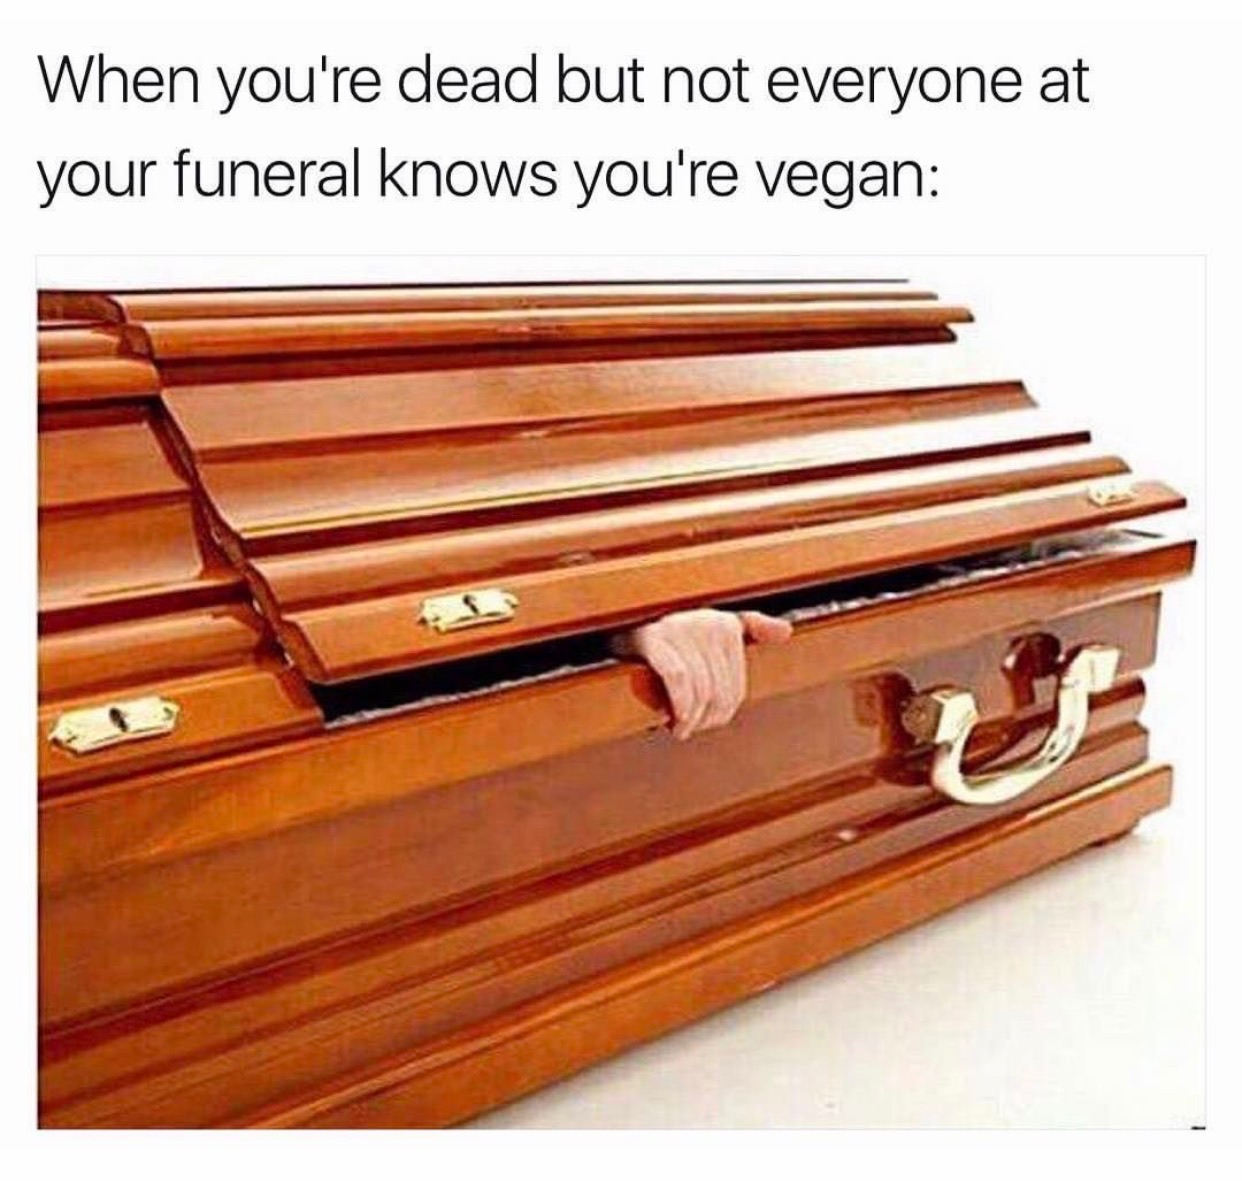 you re dead but vegan - When you're dead but not everyone at your funeral knows you're vegan